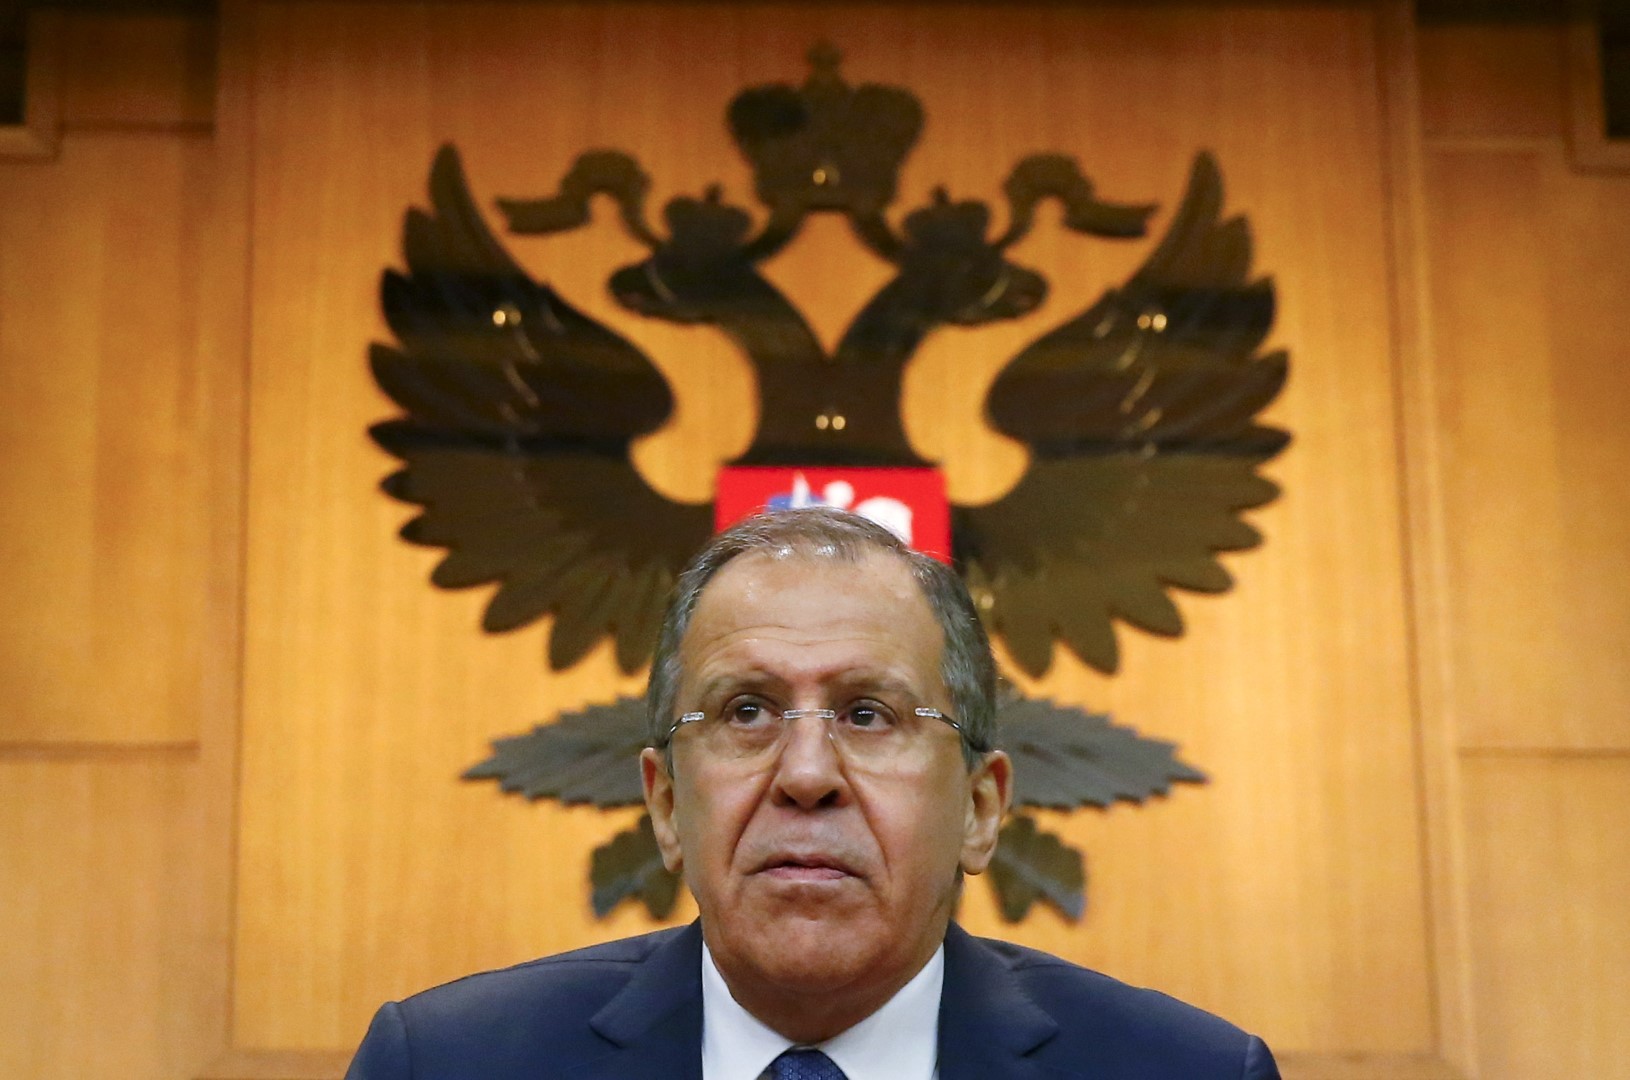 Russian Foreign Minister Sergei Lavrov leaves after giving a news conference in Moscow, Russia, January 26, 2016. Ukraine is dragging its feet on implementation of the Minsk peace agreement because it wants to keep in place the Western sanctions imposed on Russia, Lavrov said on Tuesday. REUTERS/Maxim Shemetov TPX IMAGES OF THE DAY - GF20000107513